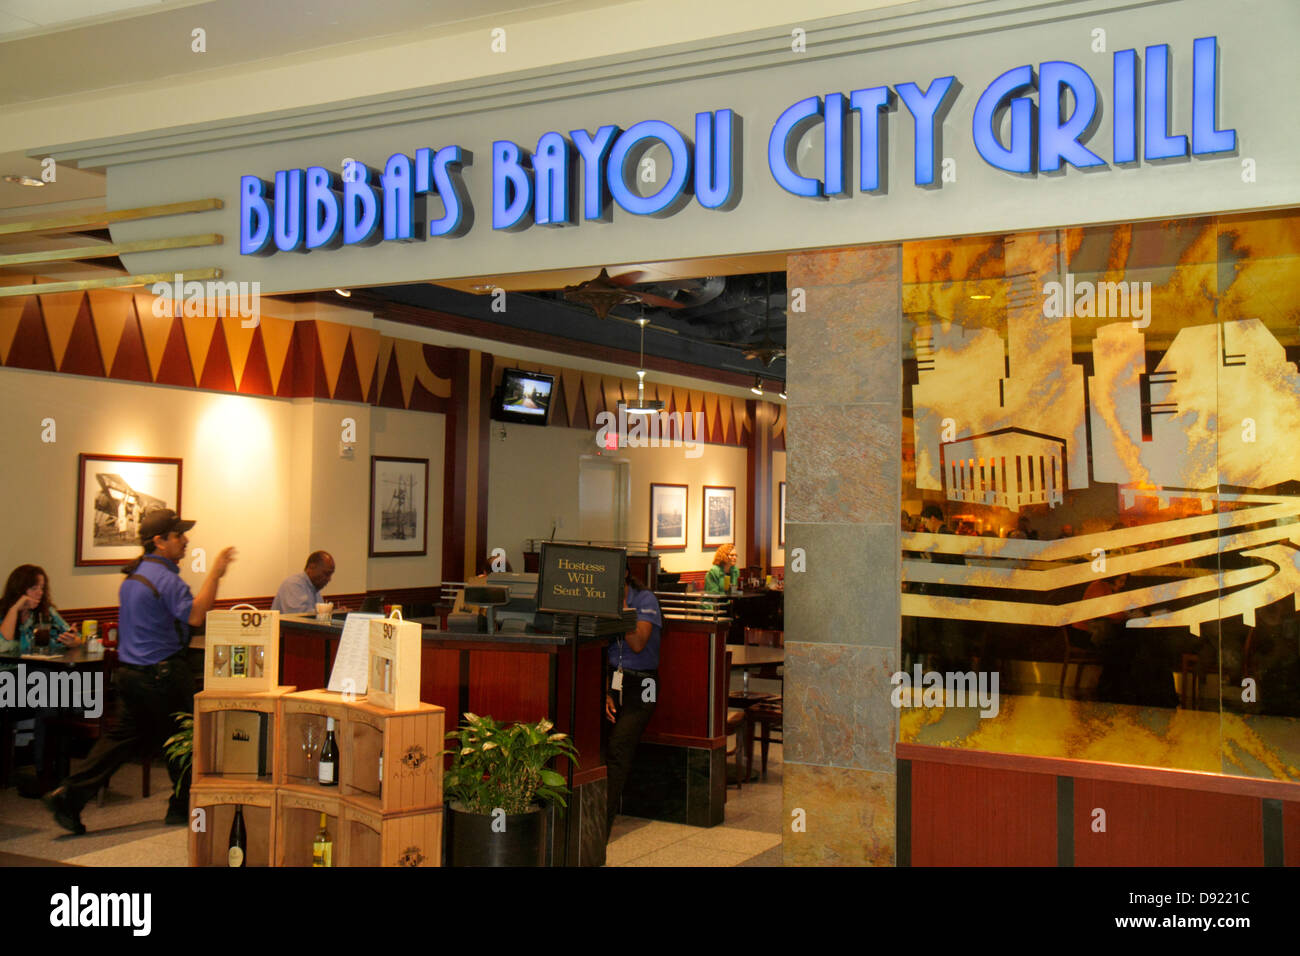 Texas,South,Southwest,Houston,George Bush Intercontinental Airport,IAH,gate,Bubba's Bayou City Grill,restaurant restaurants food dining cafe cafes,fro Stock Photo